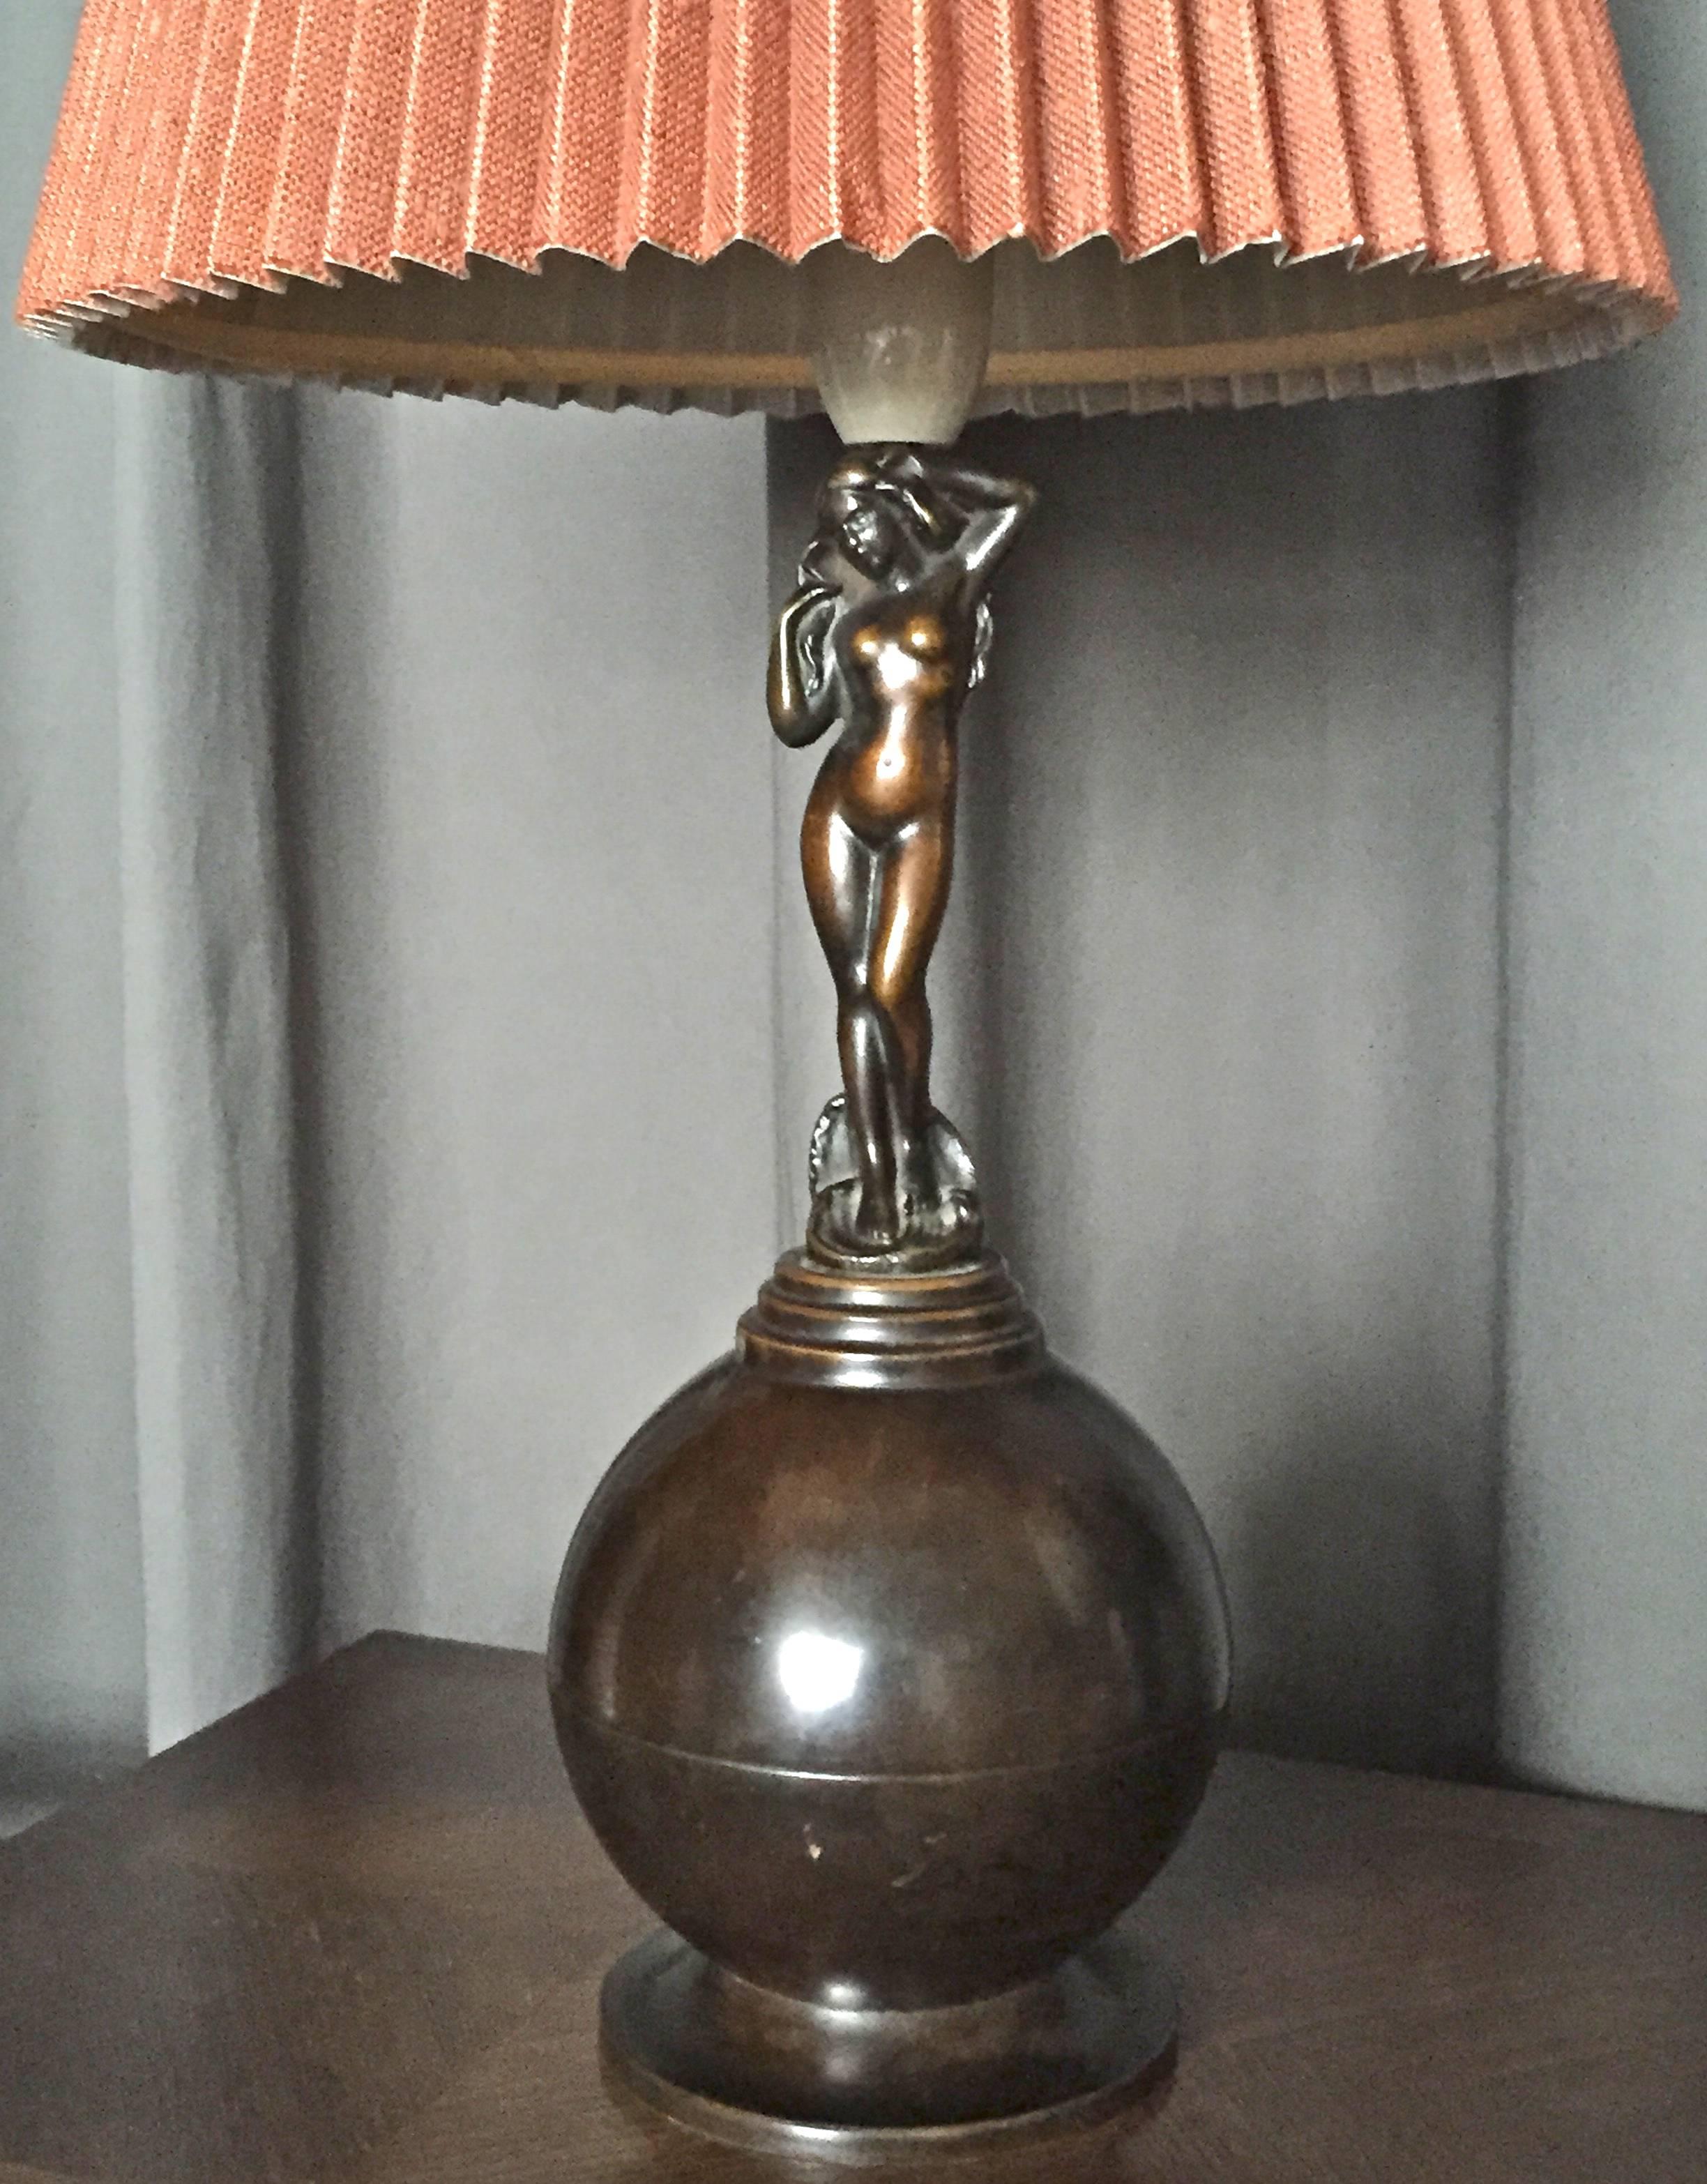 An Art Deco style, patinated bronze table lamp by AE Bronze, Denmark, circa 1930s.
Patinated bronze, marked by manufacturer. Measures: H-21